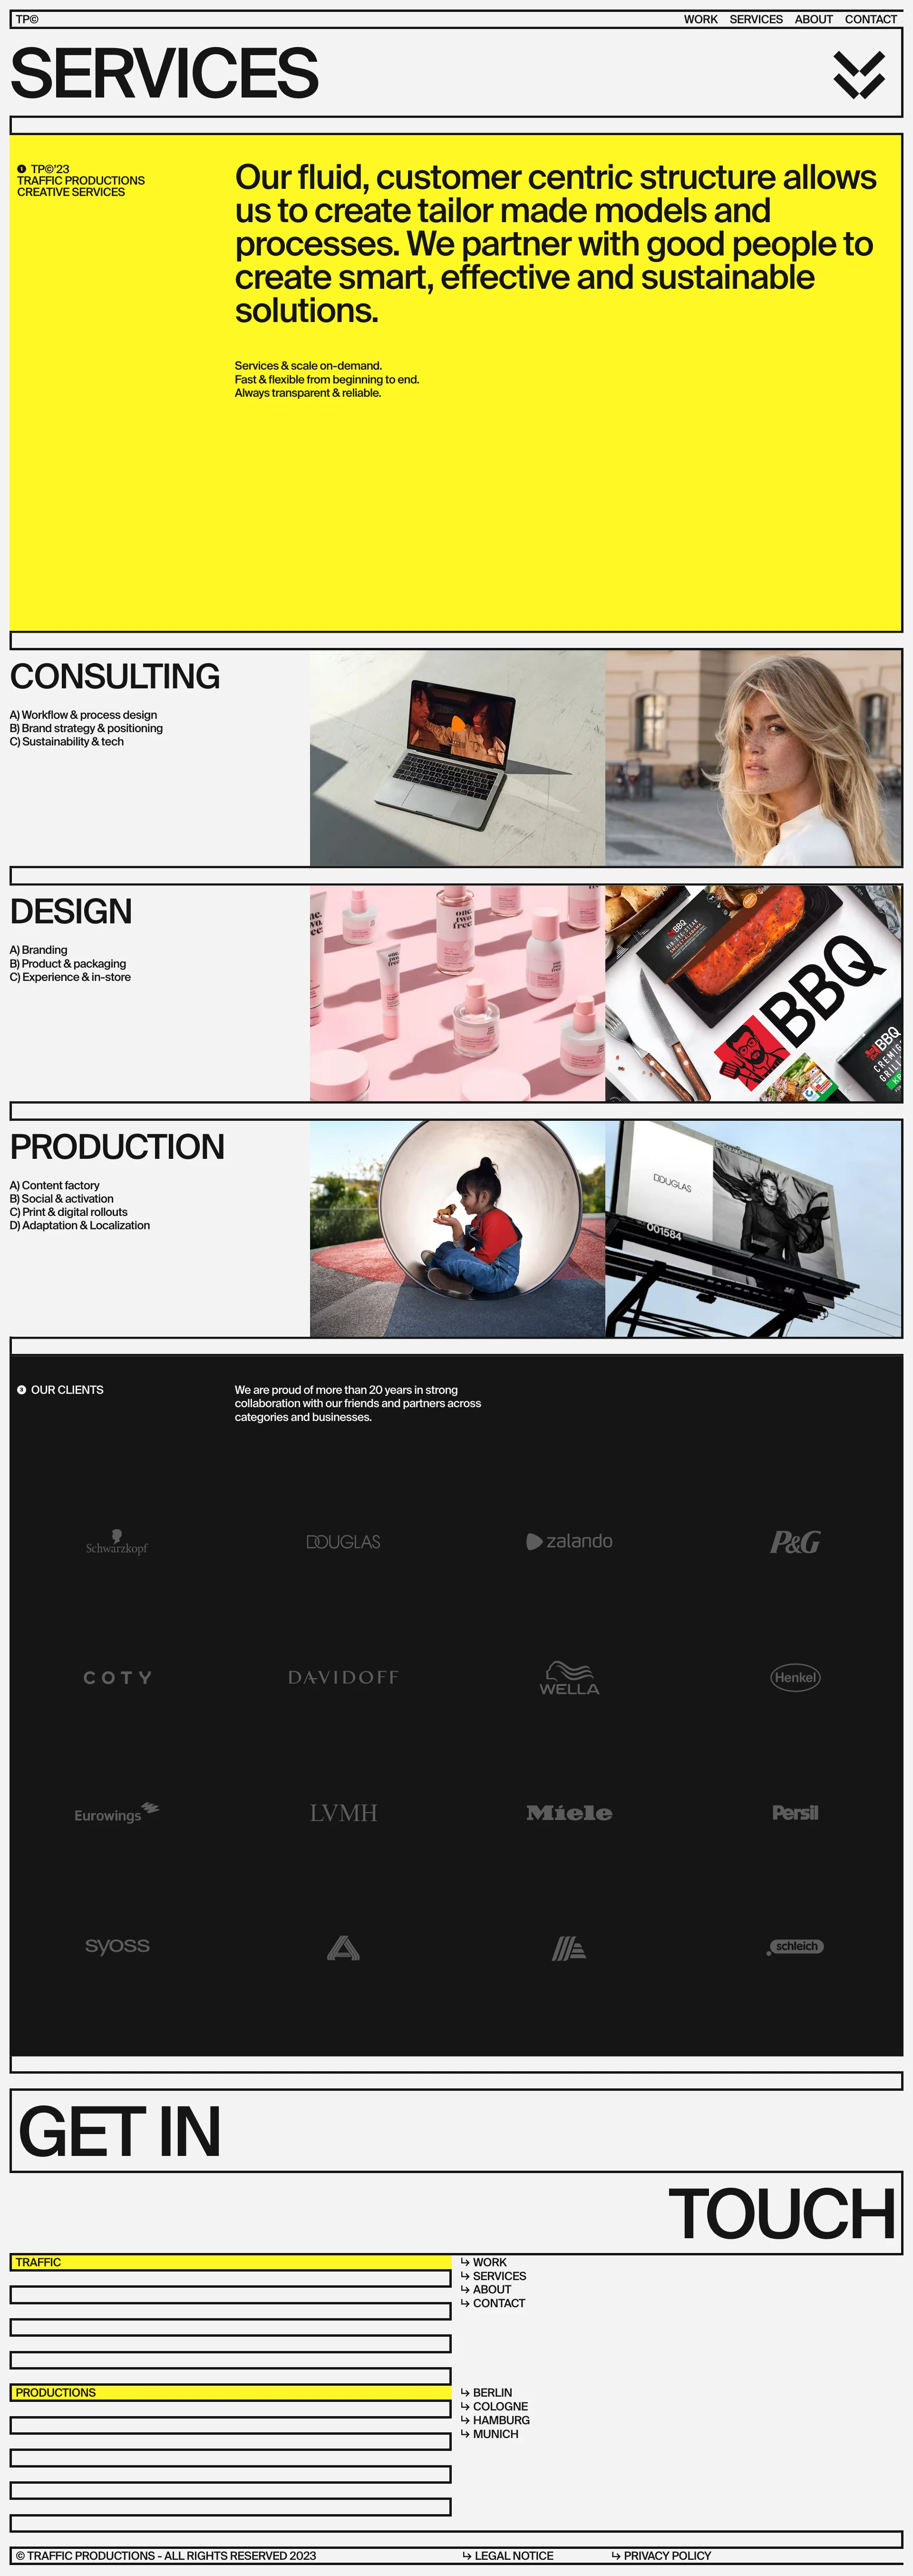 Traffic Productions Landing Page Example: A service-oriented, creative production house, working across physical and digital. We design things from beginning to end, that give good traffic.